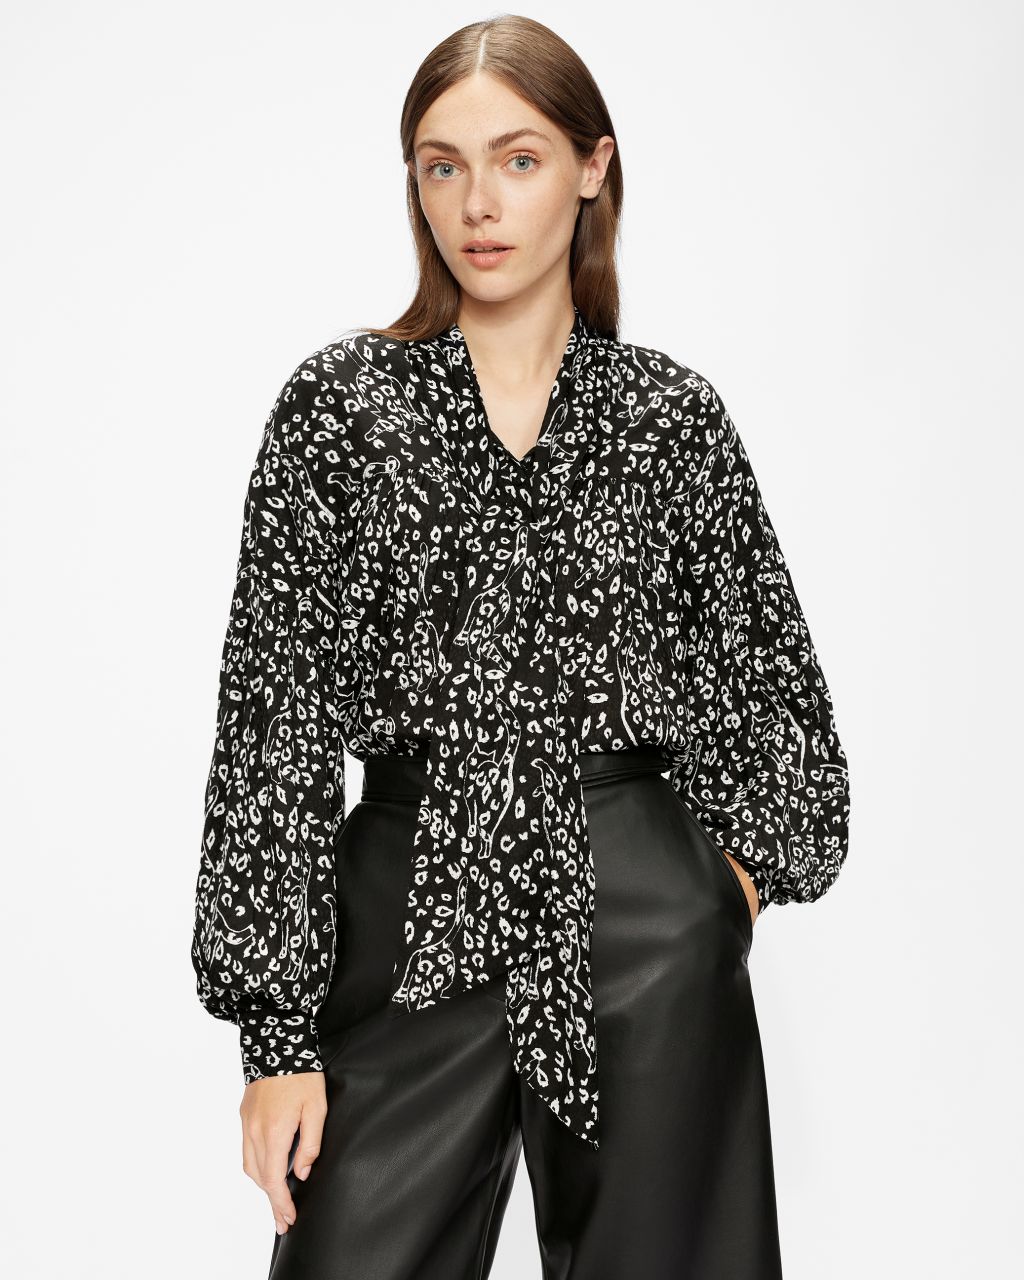 Ted Baker Women's Printed Pussy Bow Blouse in Black, Gaelle